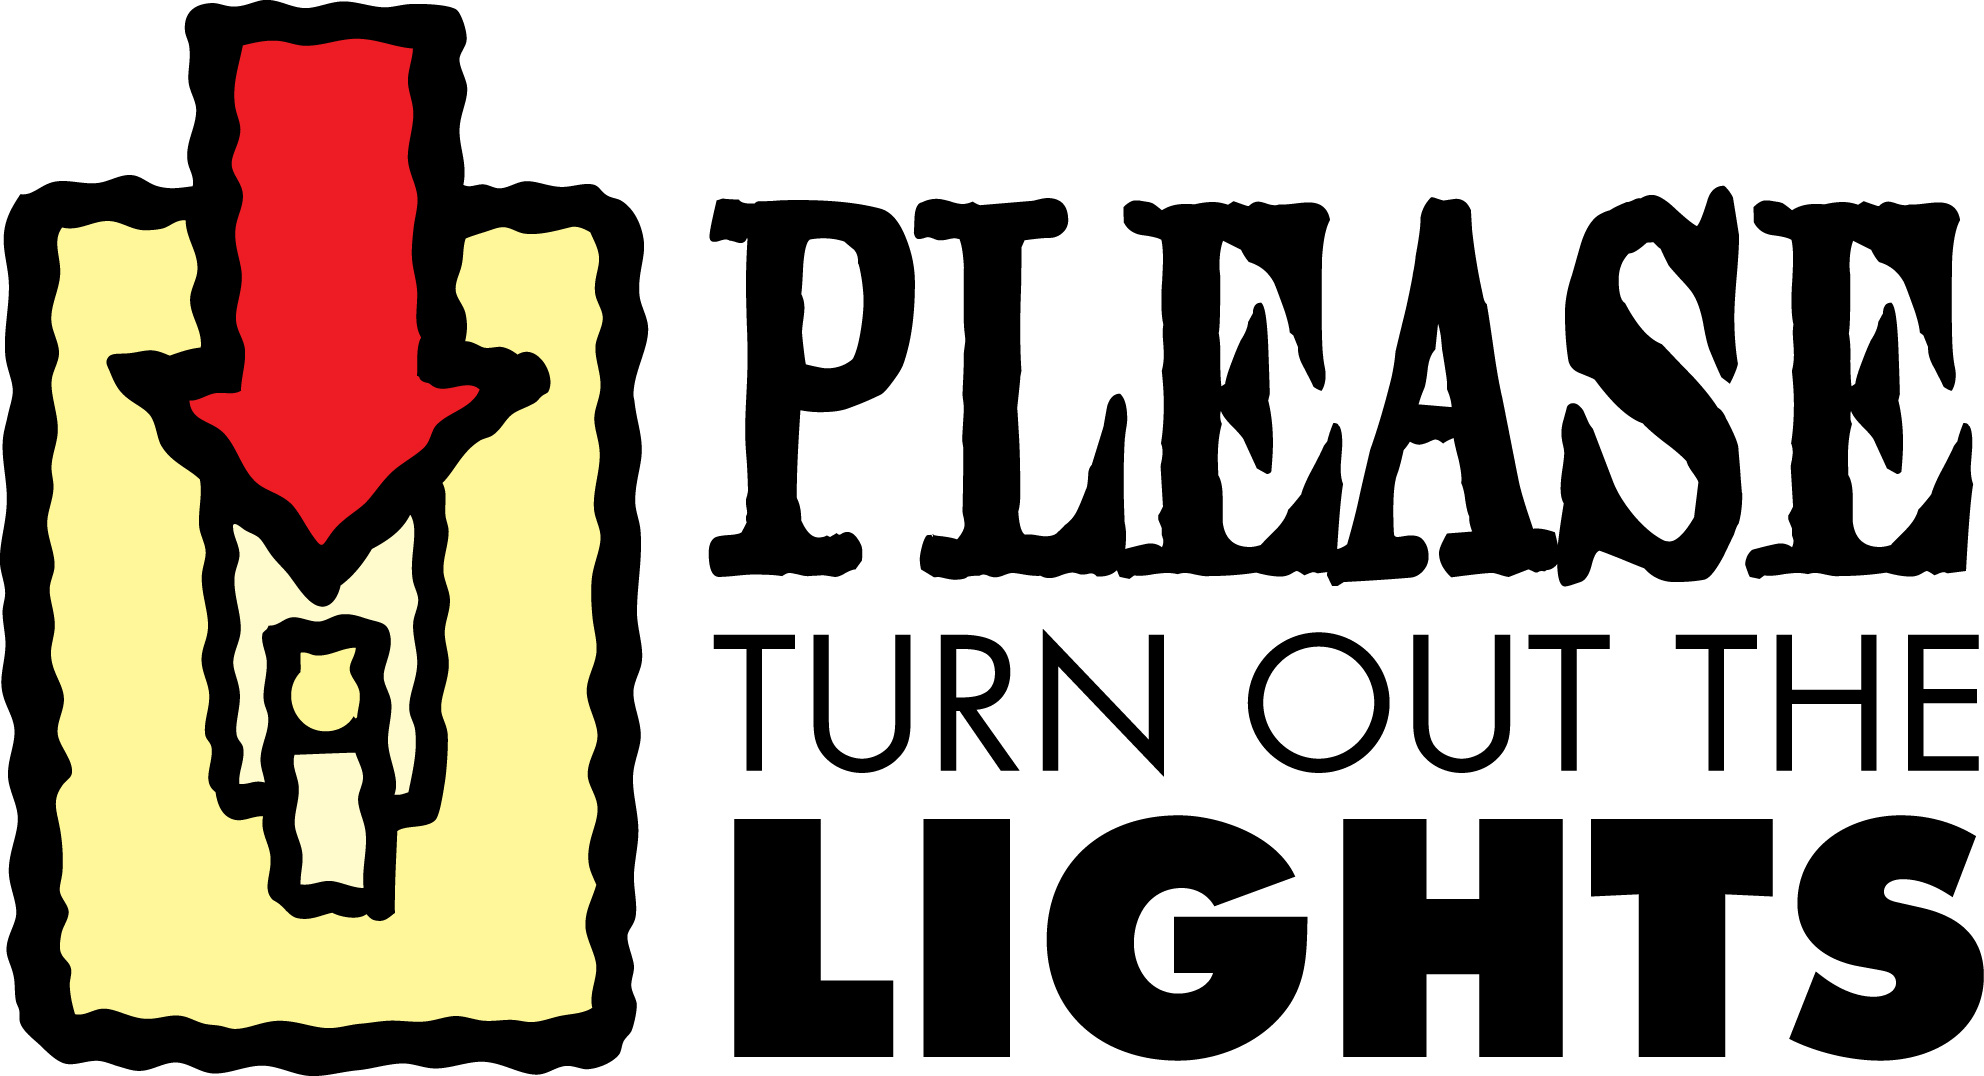 Turn Off Lights Clipart 